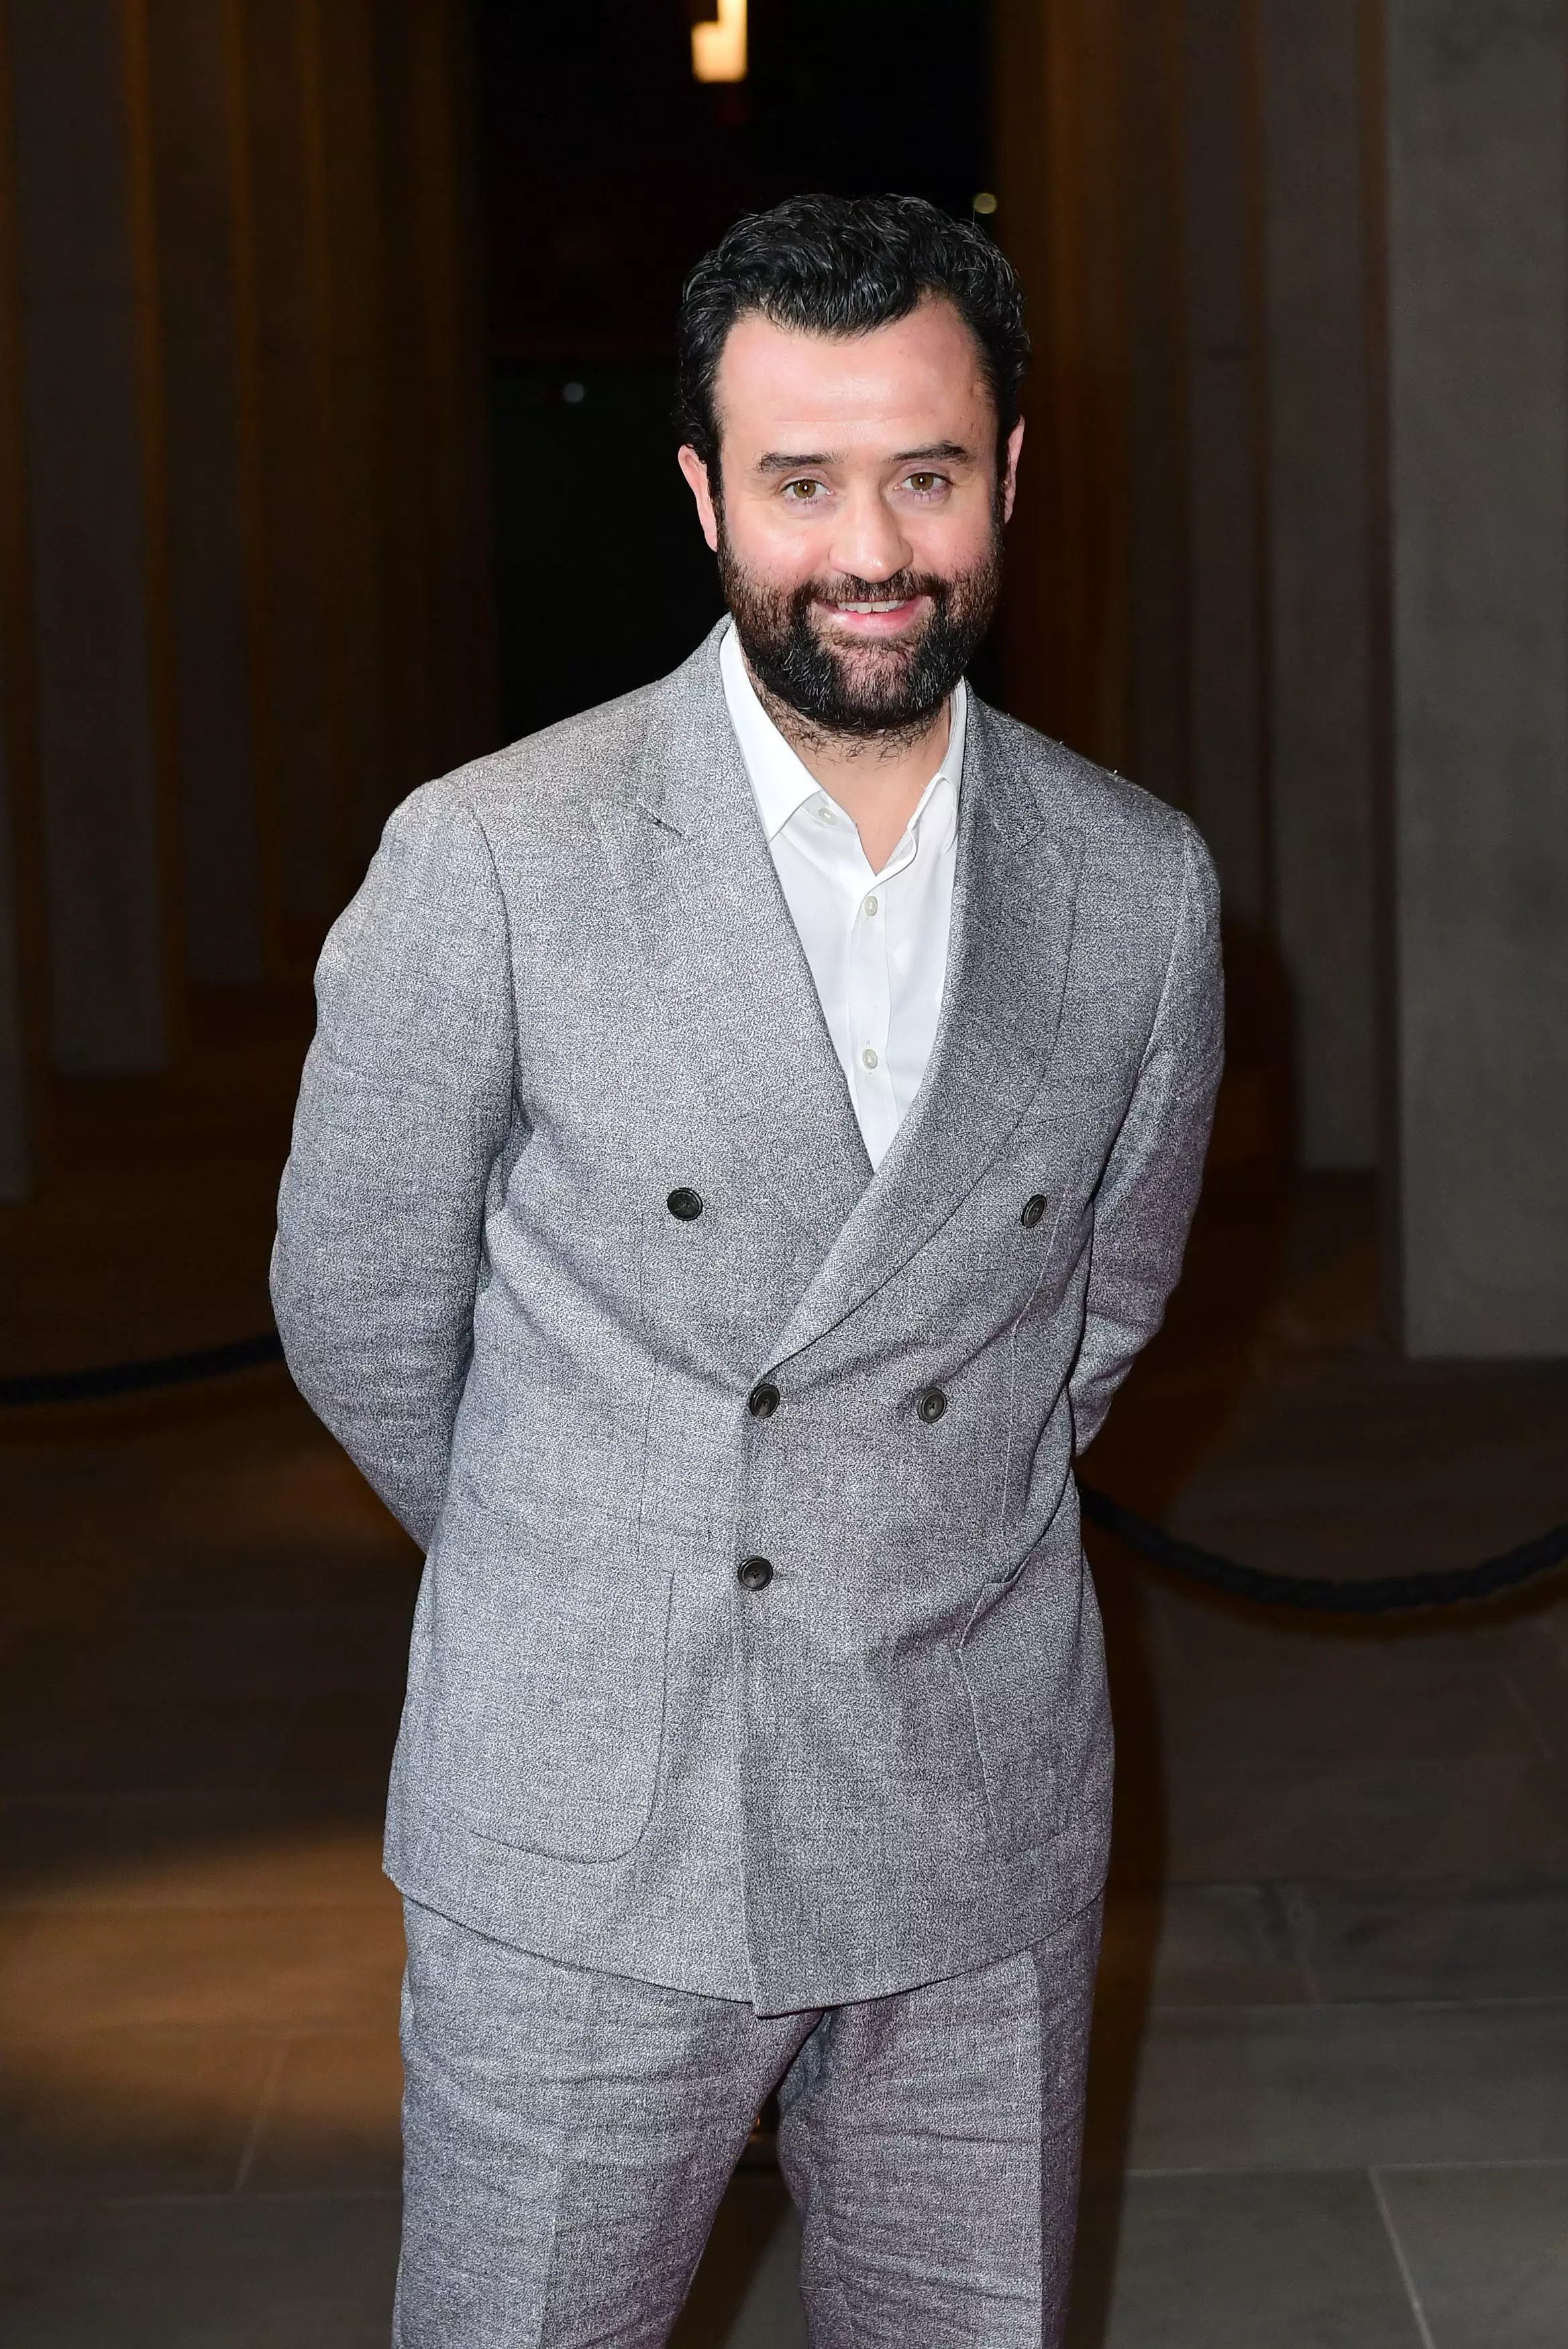 Daniel Mays will star as Detective Chief Inspector Peter Jay.